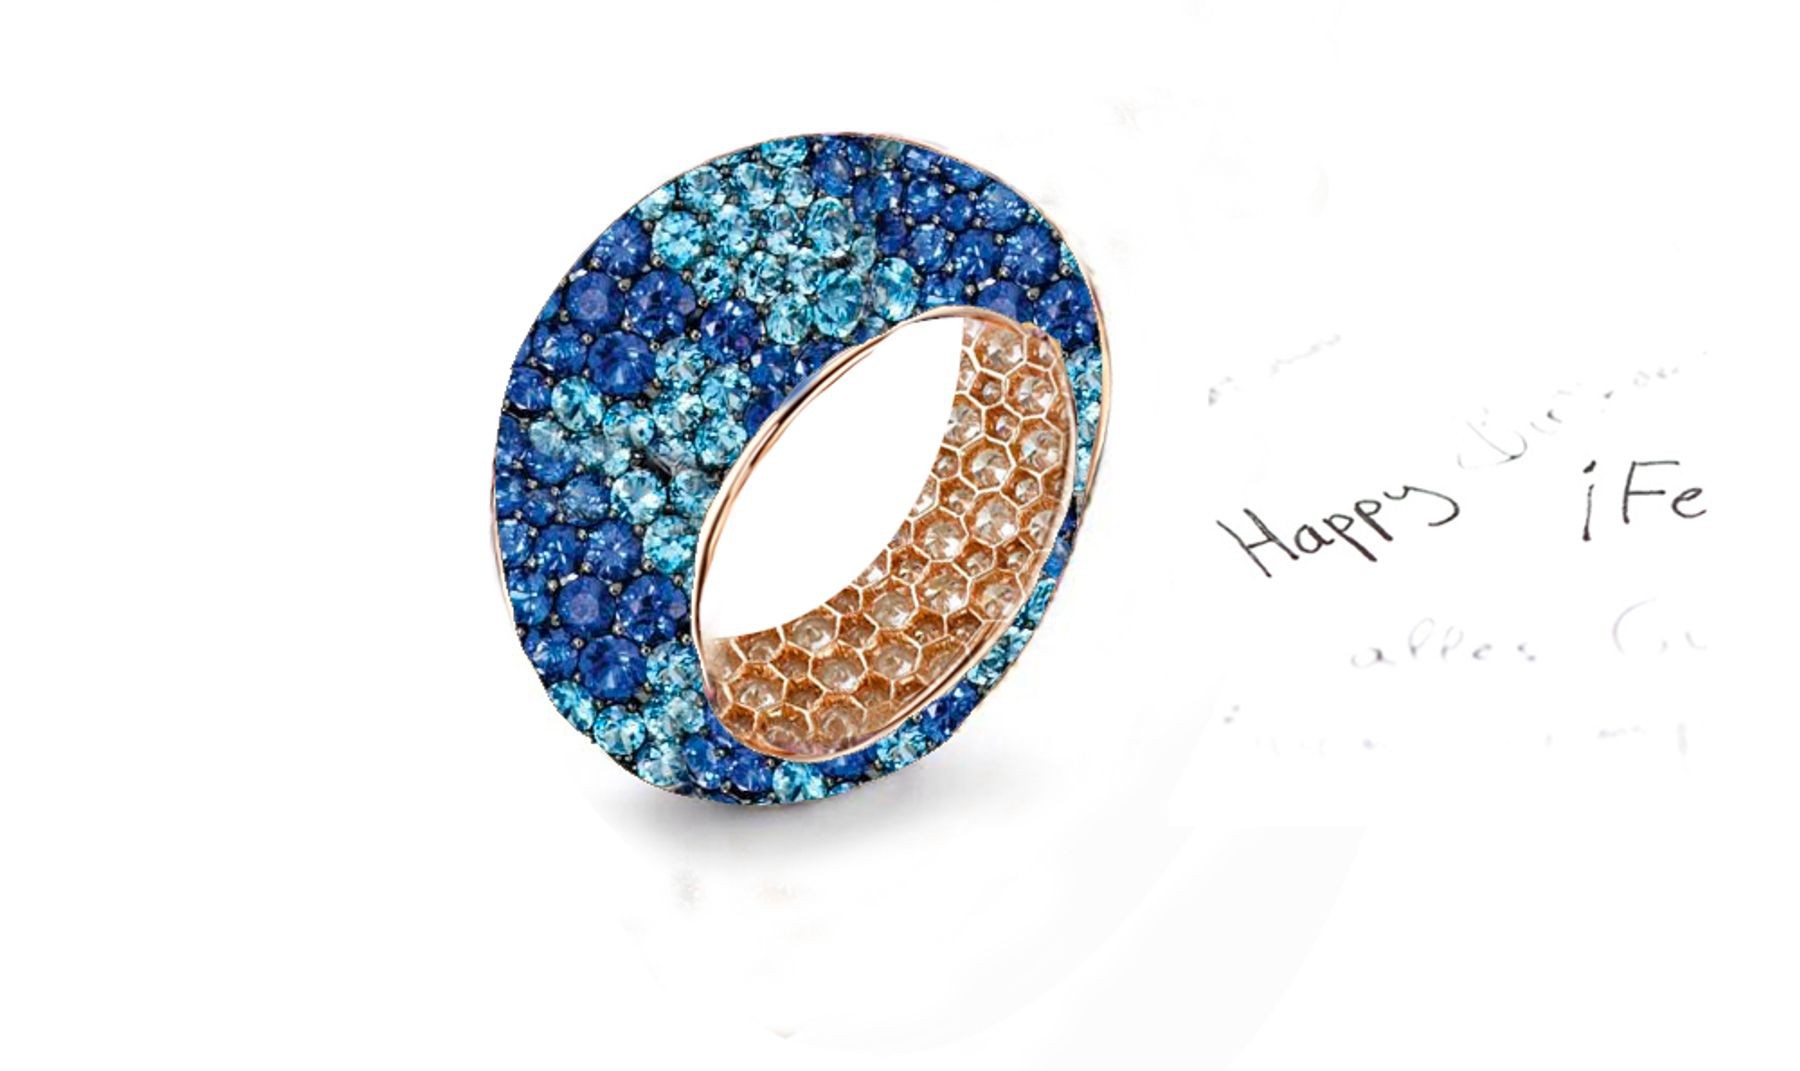 Enjoy The Magic of Delicate Eternity Rings Featuring Diamonds & Rubies, Emeralds & Sapphires